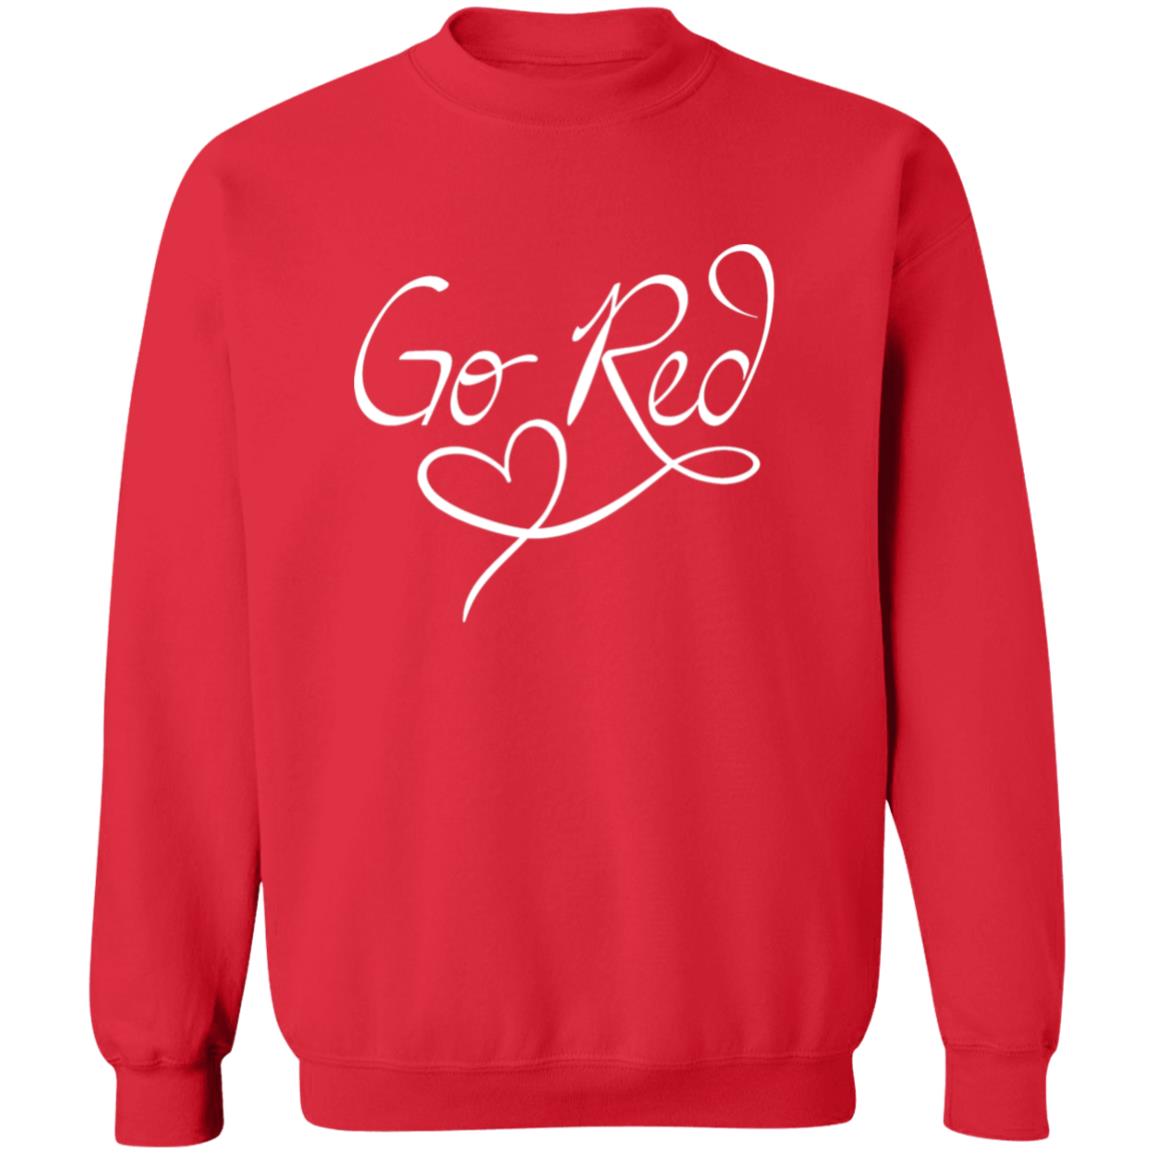 red crewneck sweatshirt with words "Go Red" in script and a heart underneath